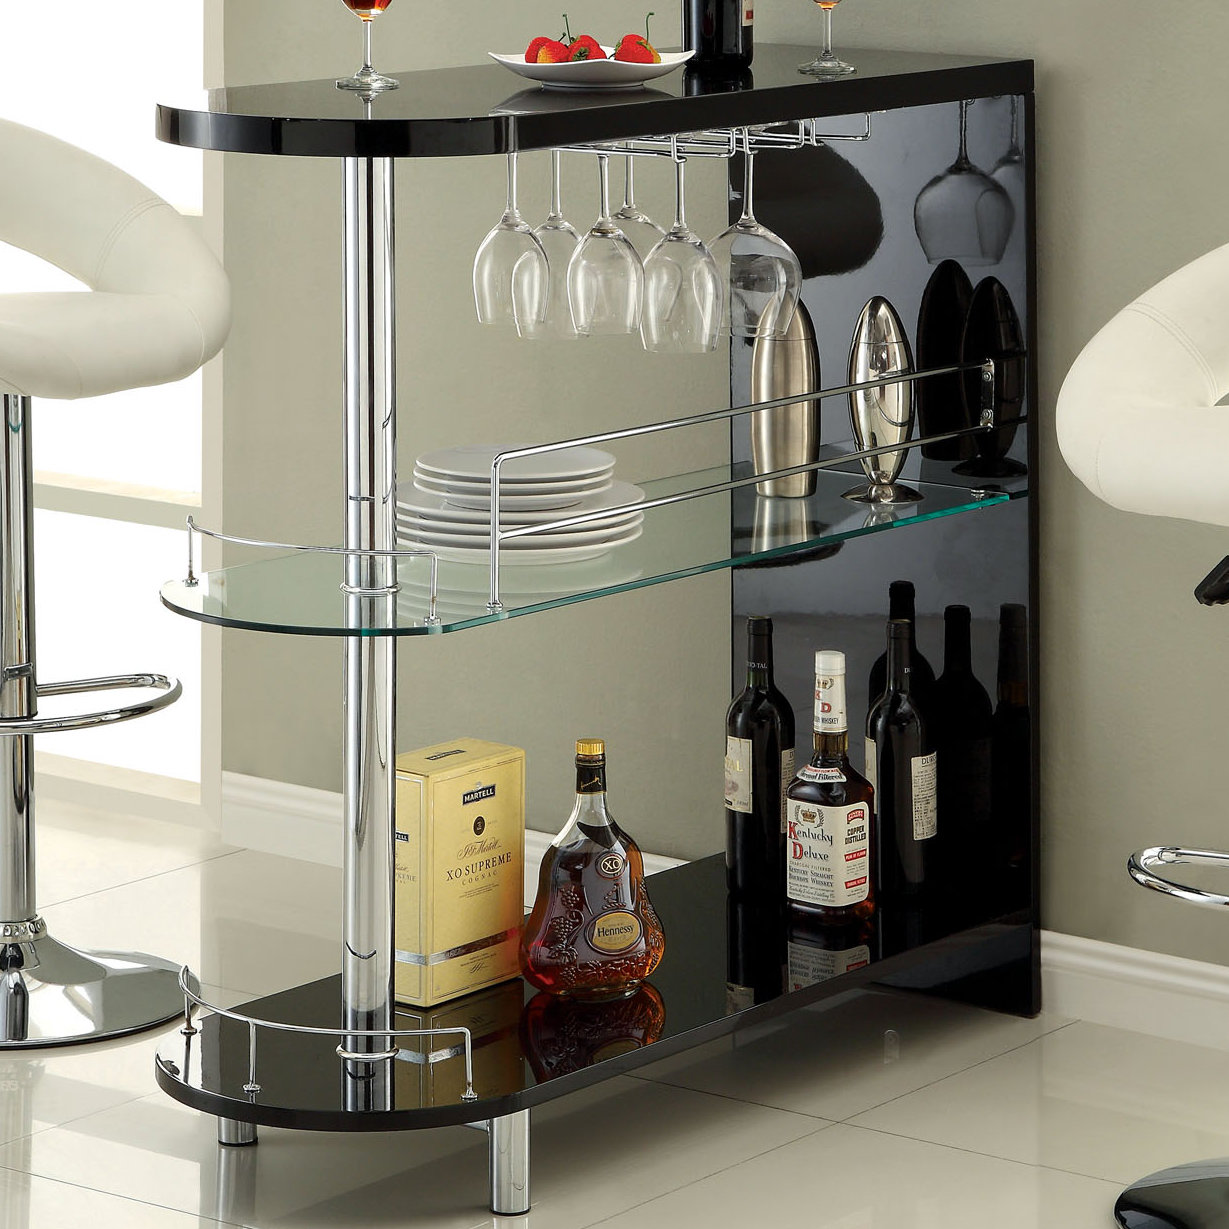 Mini Bar and Table. Order now at HOG online marketplace